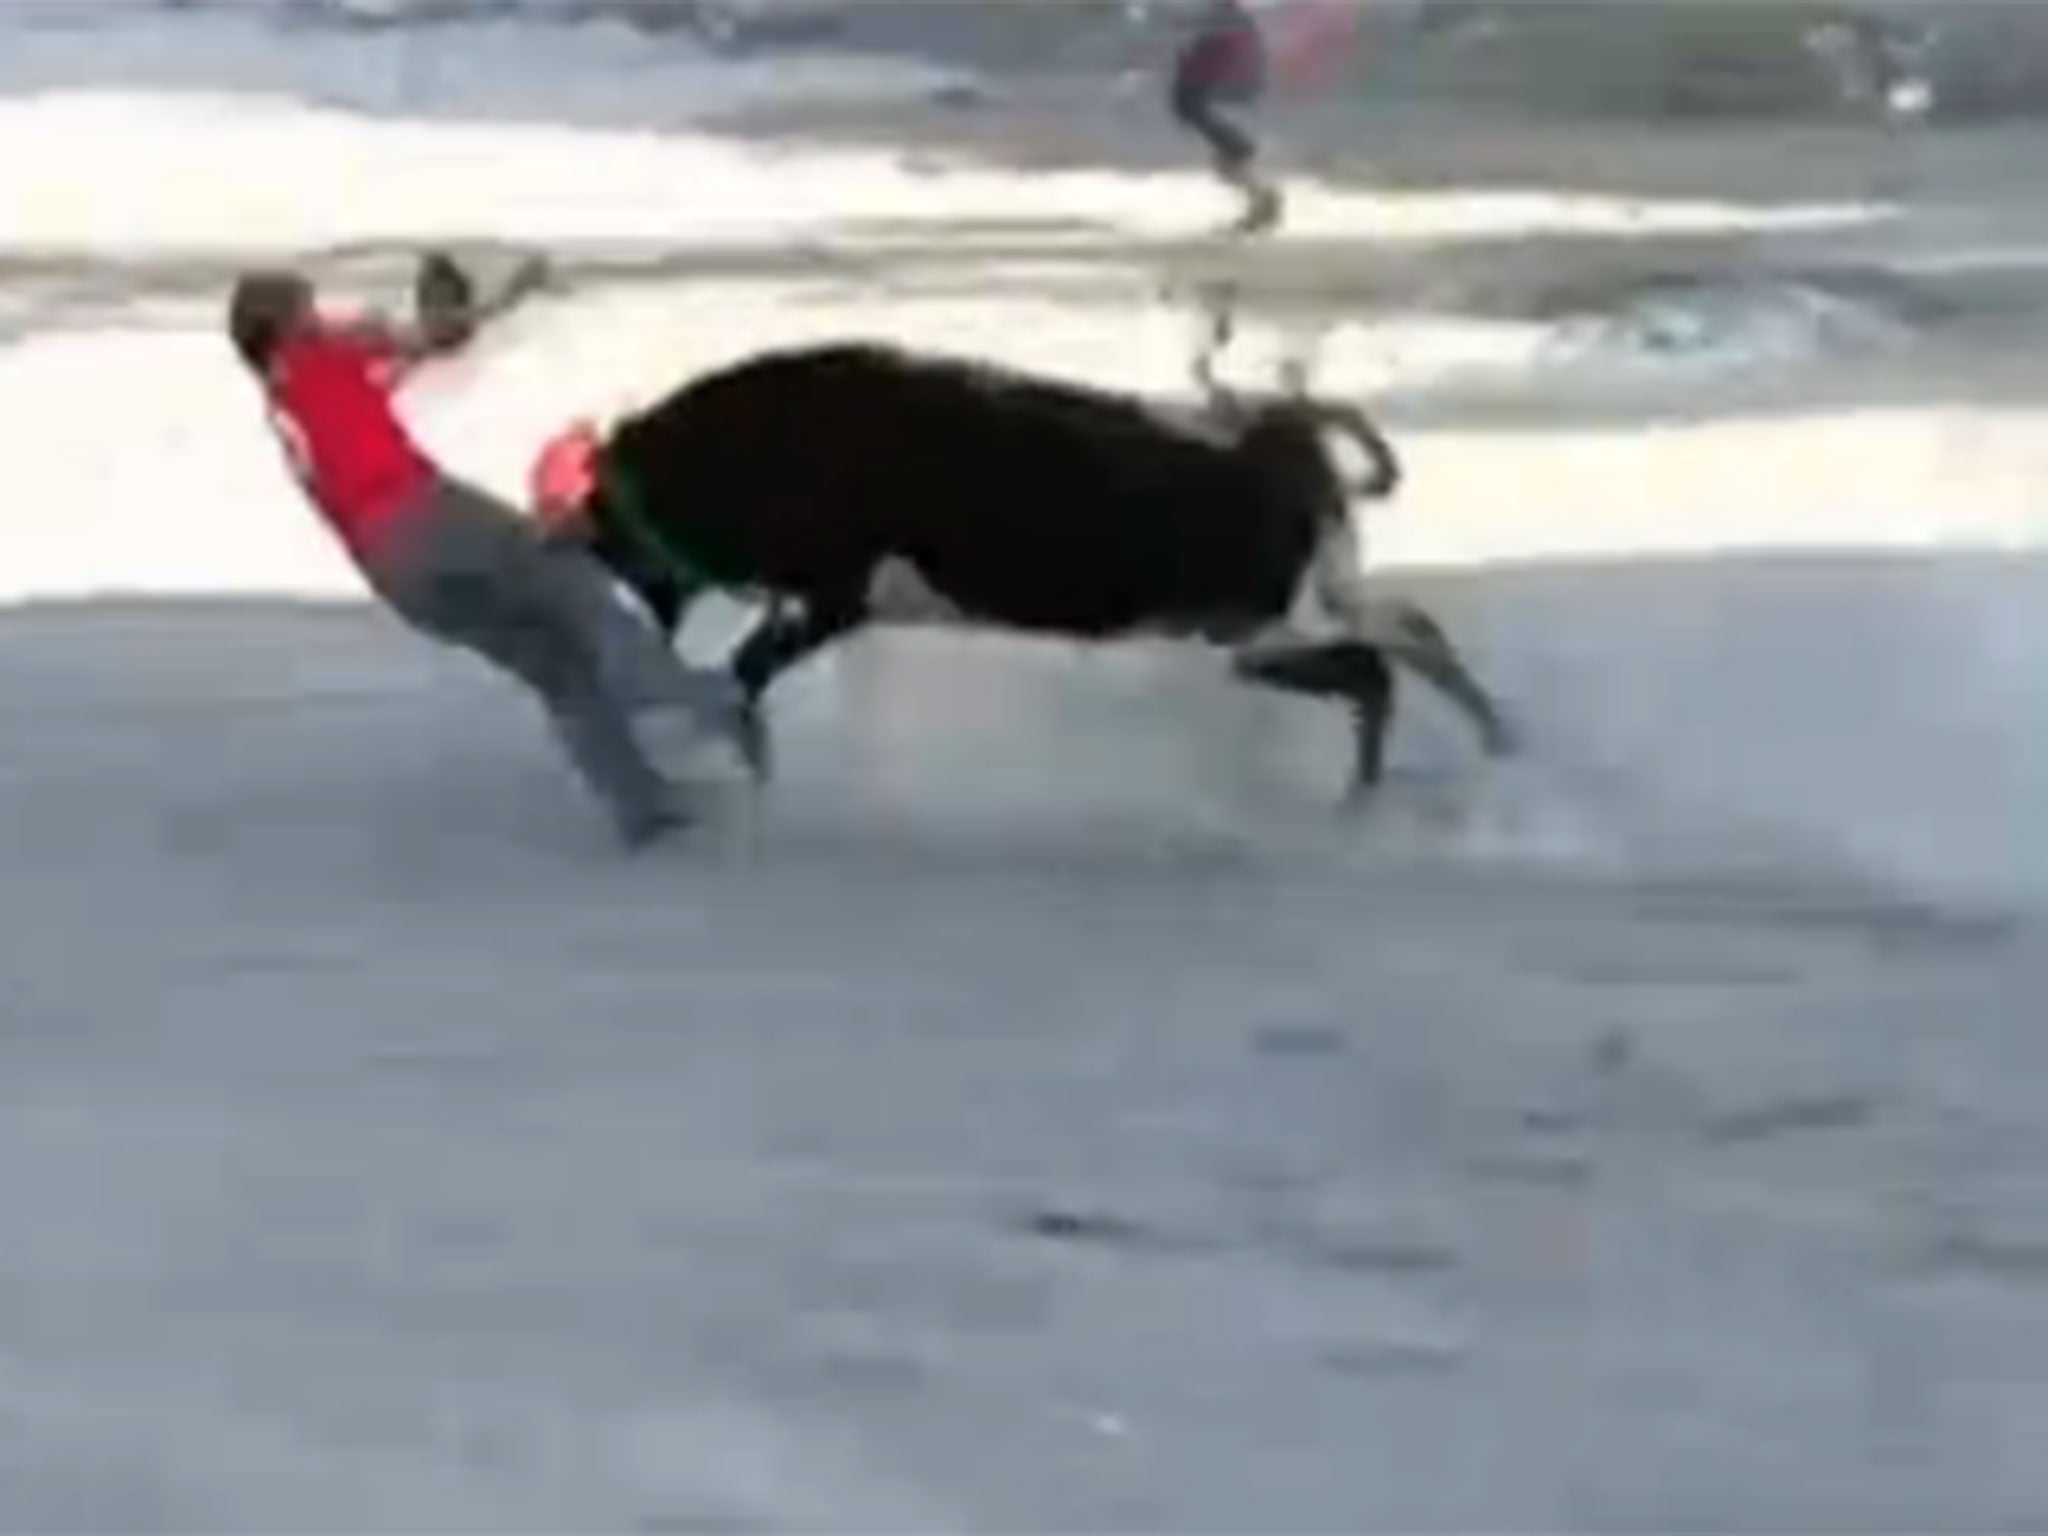 One man is knocked to the ground and attacked by the bull